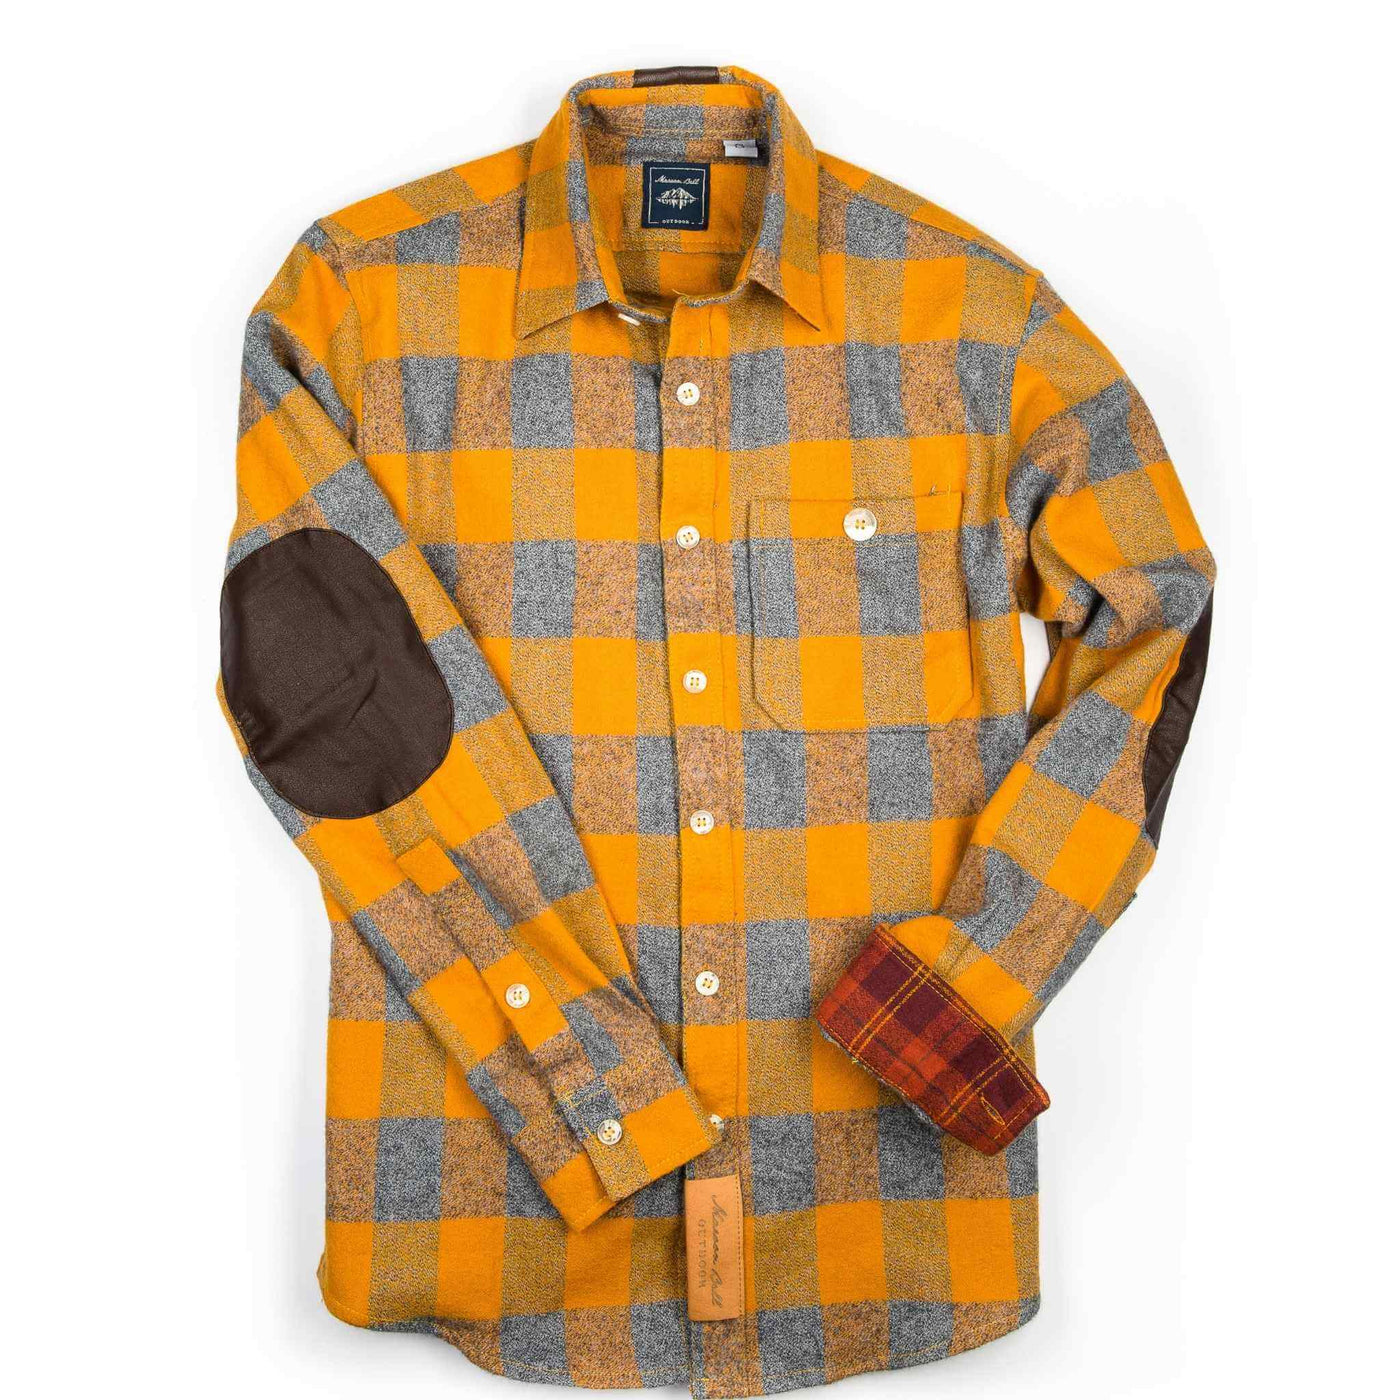 A gold plaid flannel shirt with vegan leather elbow patches & contrast under-cuffs from the Denver, Colorado-based Maroon Bell Outdoor.